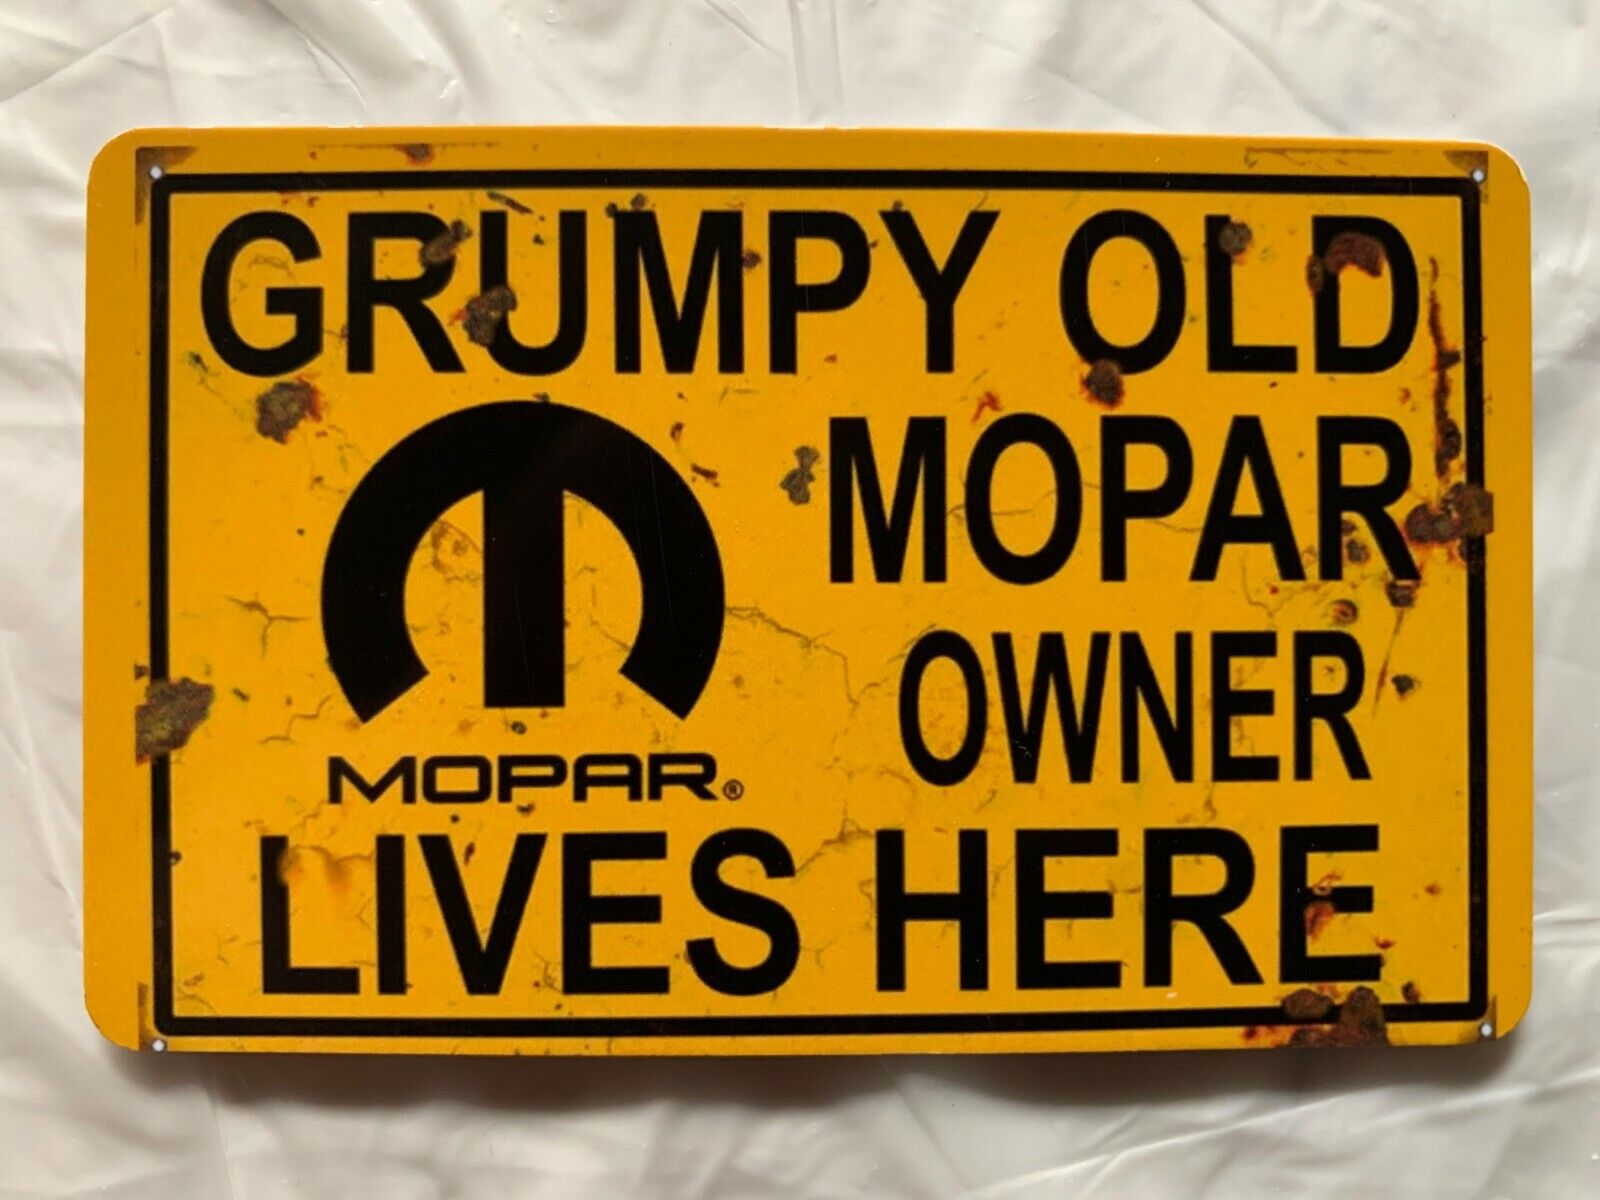 Grumpy Old Mopar Owner Lives Here Magnet Muscle Car Hot Rod Dodge Plymouth Jeep